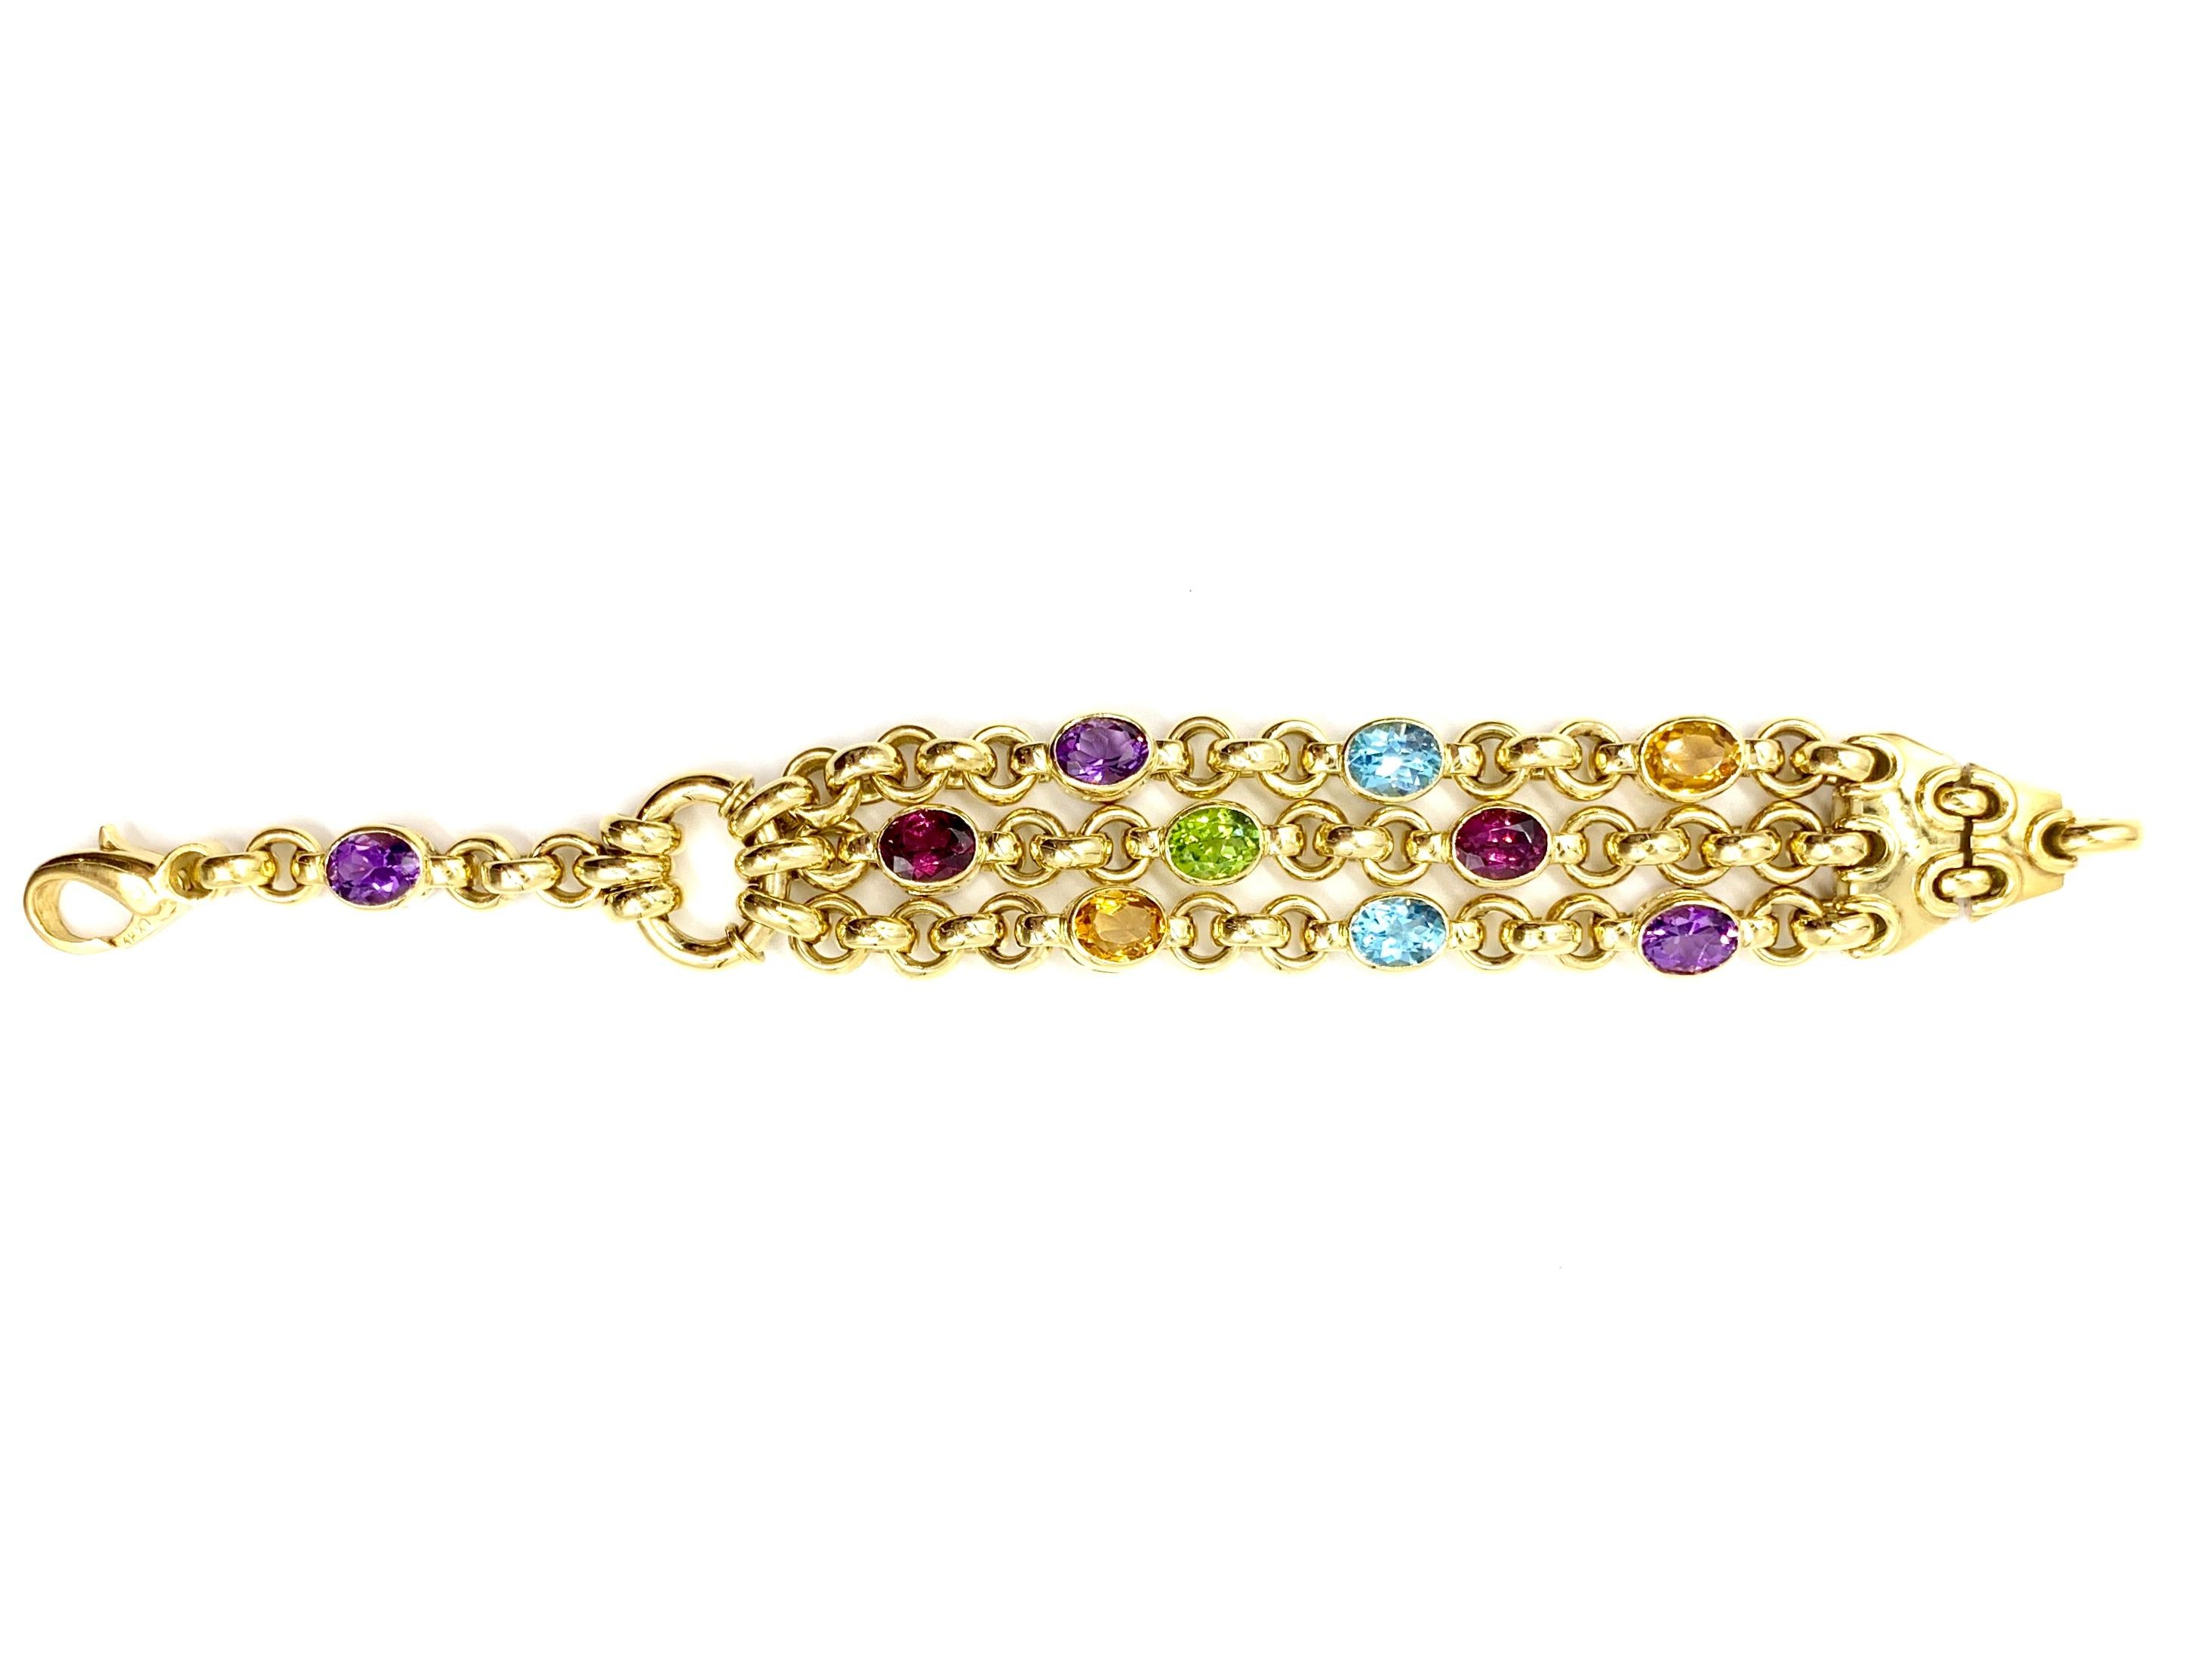 A very well made, high quality solid 18 karat yellow gold heavy link bracelet featuring three chains with scattered bezel set faceted oval semi precious gemstones. Gemstones are as follows: 3 amethysts, 2 Swiss blue topaz, 2 rhodolite garnets, 2